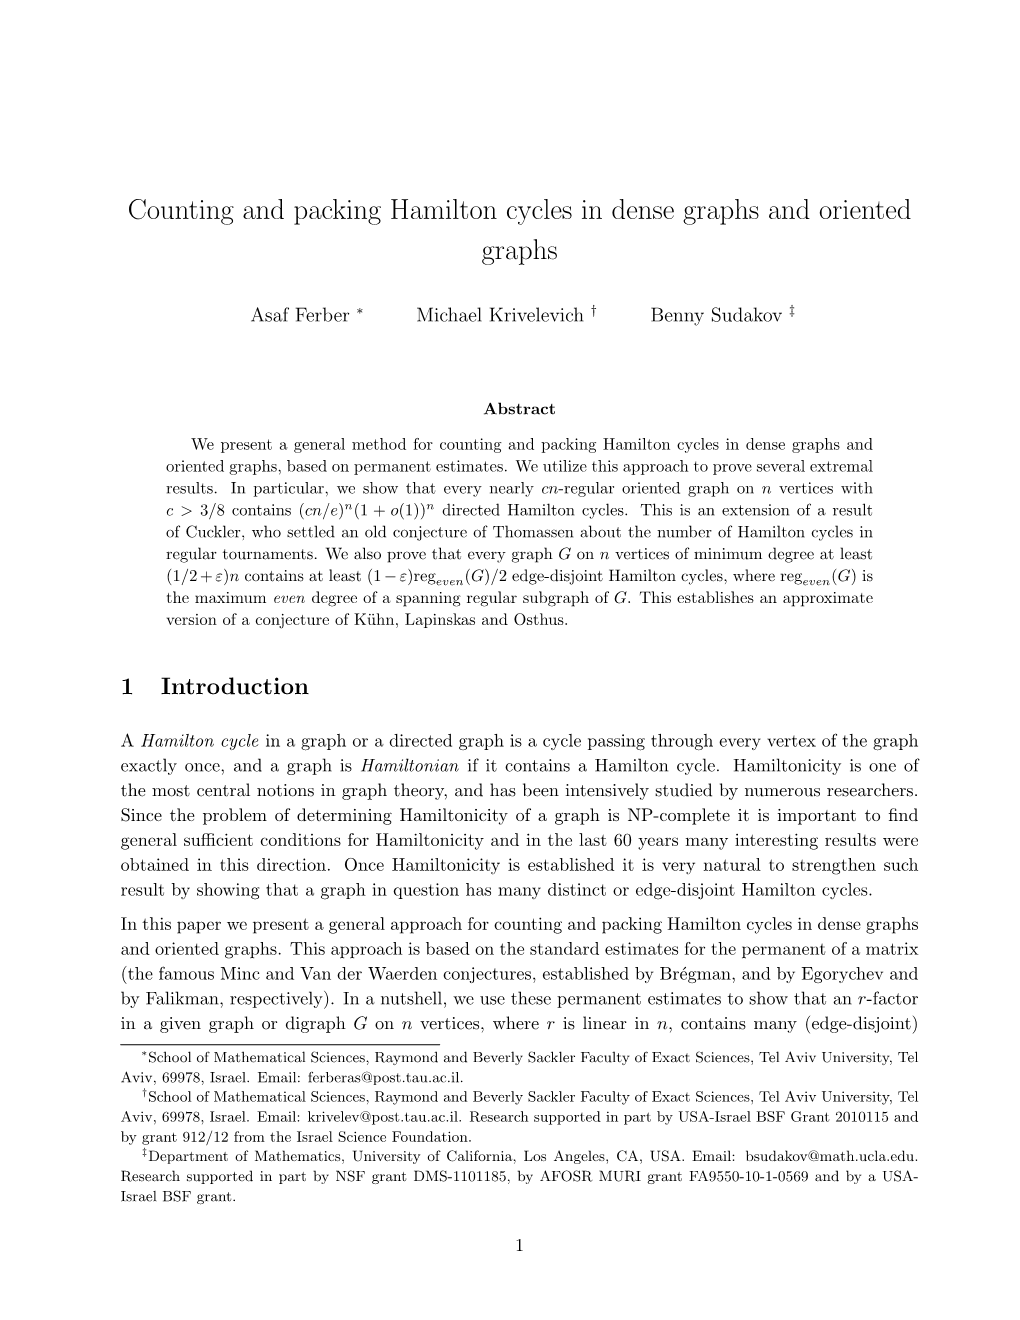 Counting and Packing Hamilton Cycles in Dense Graphs and Oriented Graphs